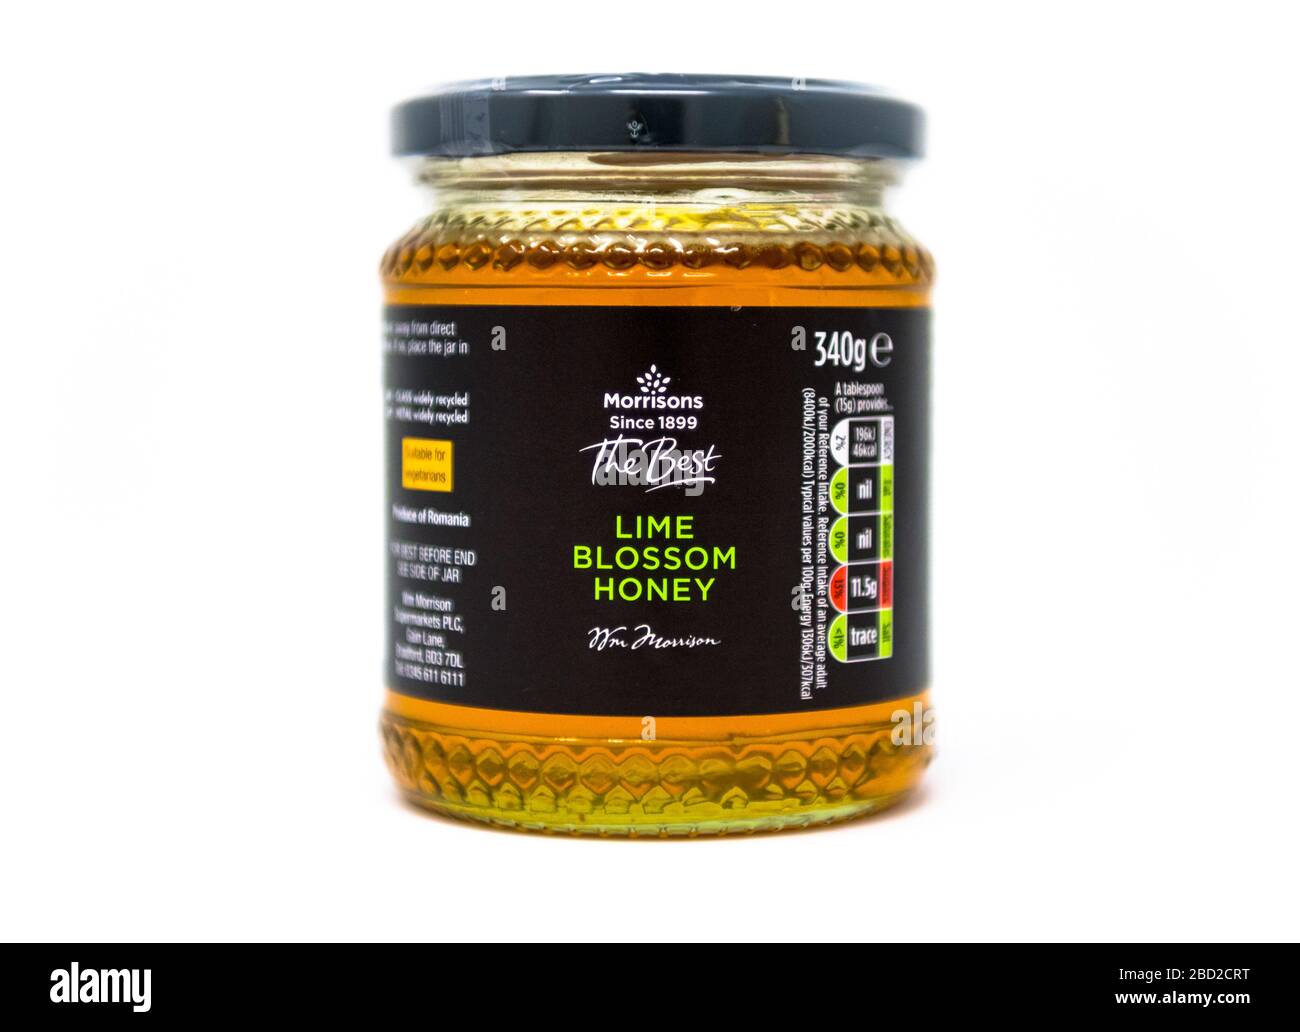 Morrisons Lime blossom honey in a 340g glass container. Stock Photo